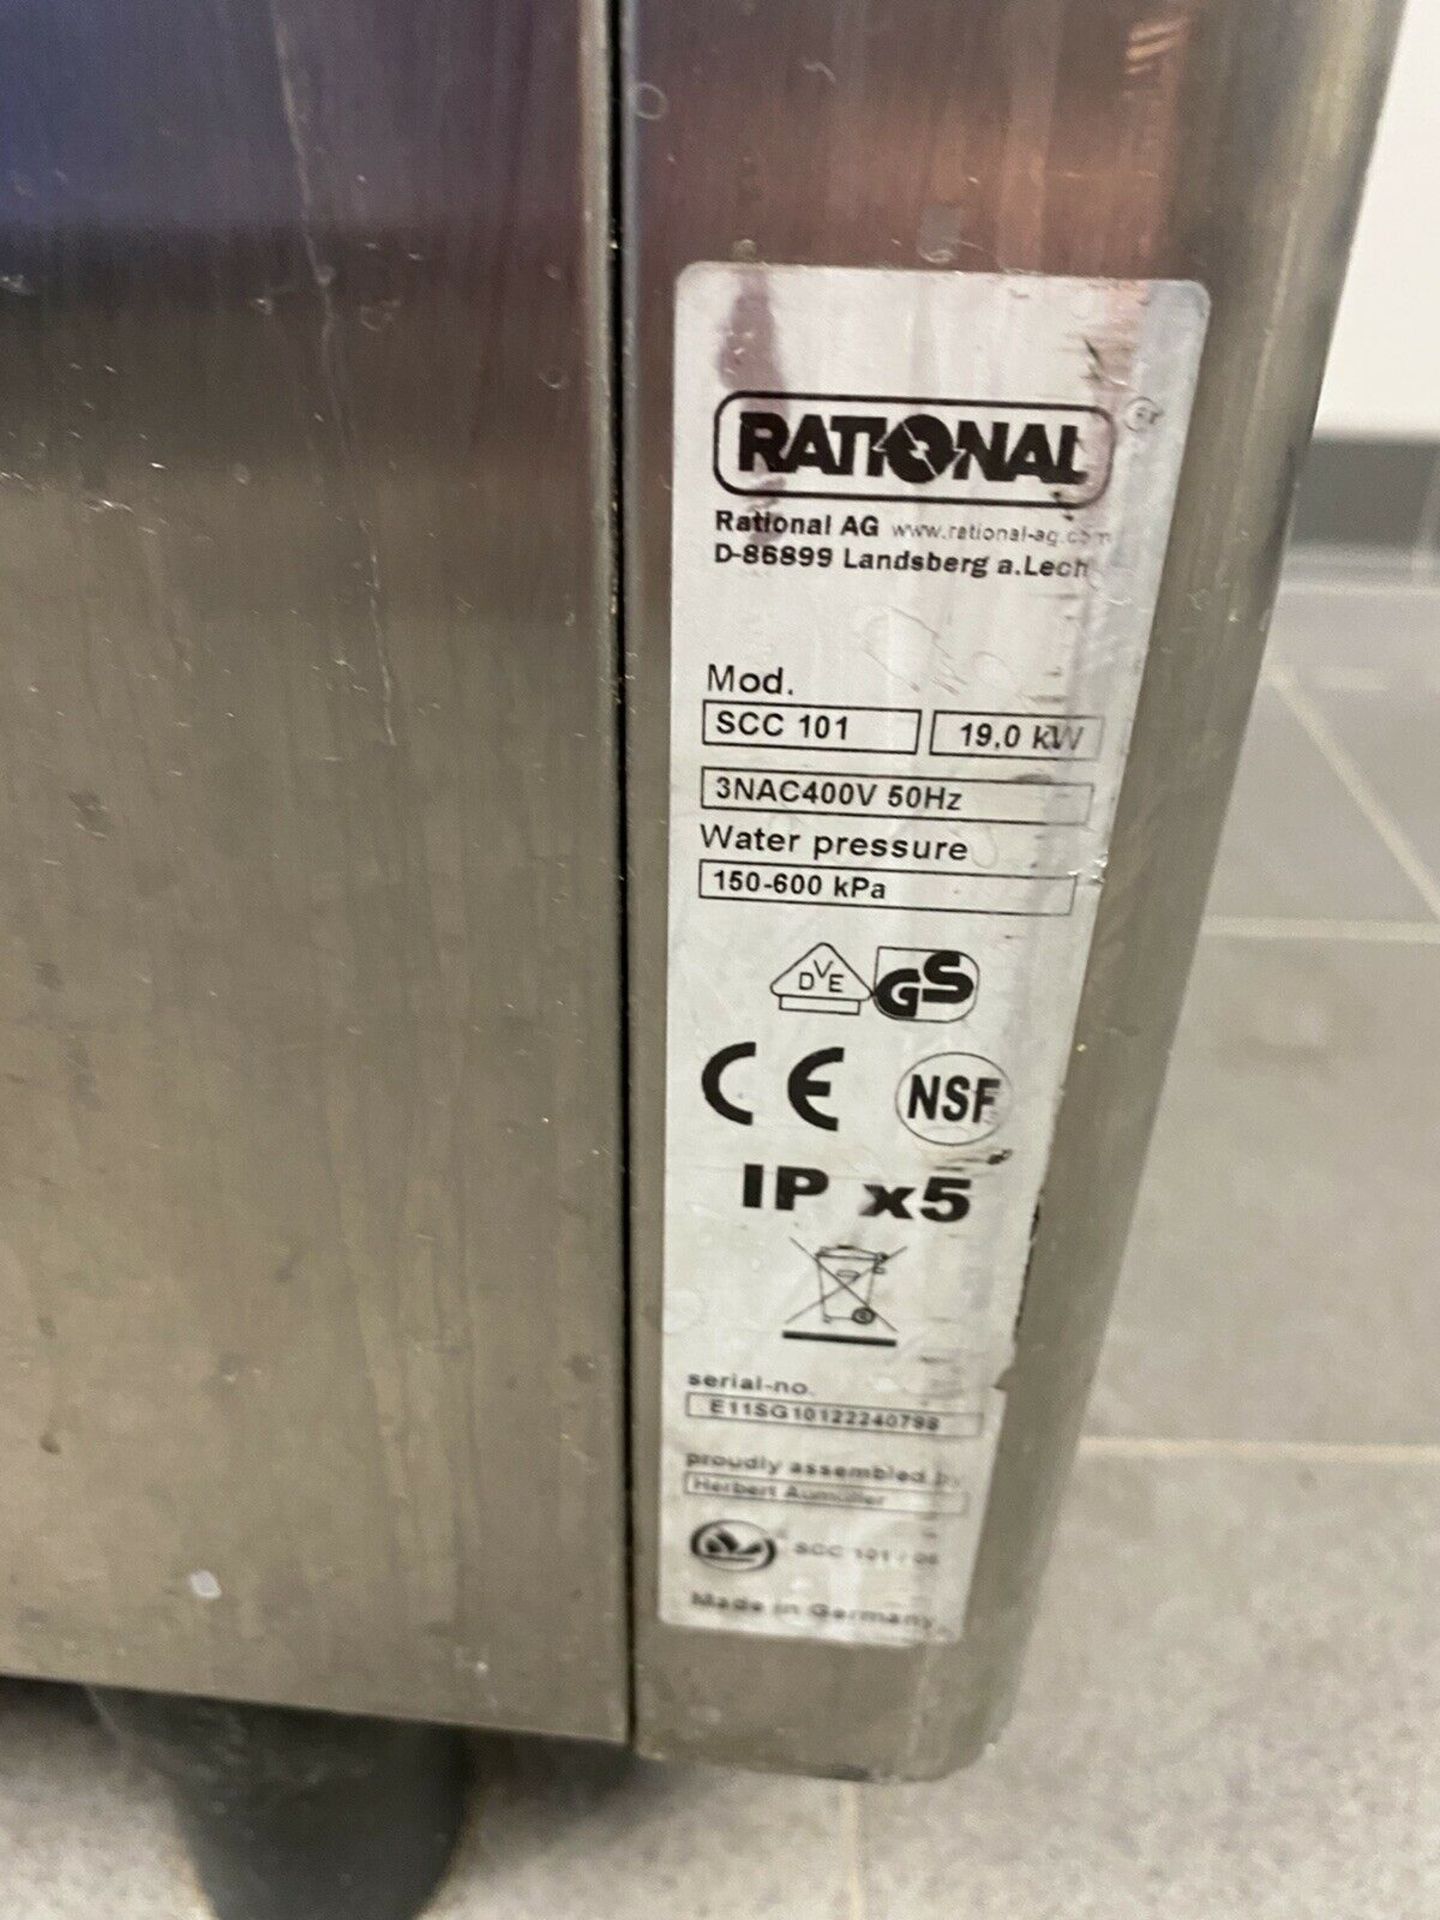 1 x Rational  Grid Electric Combi Oven Care Control - Model SCC101 - Serial Number - Image 3 of 3